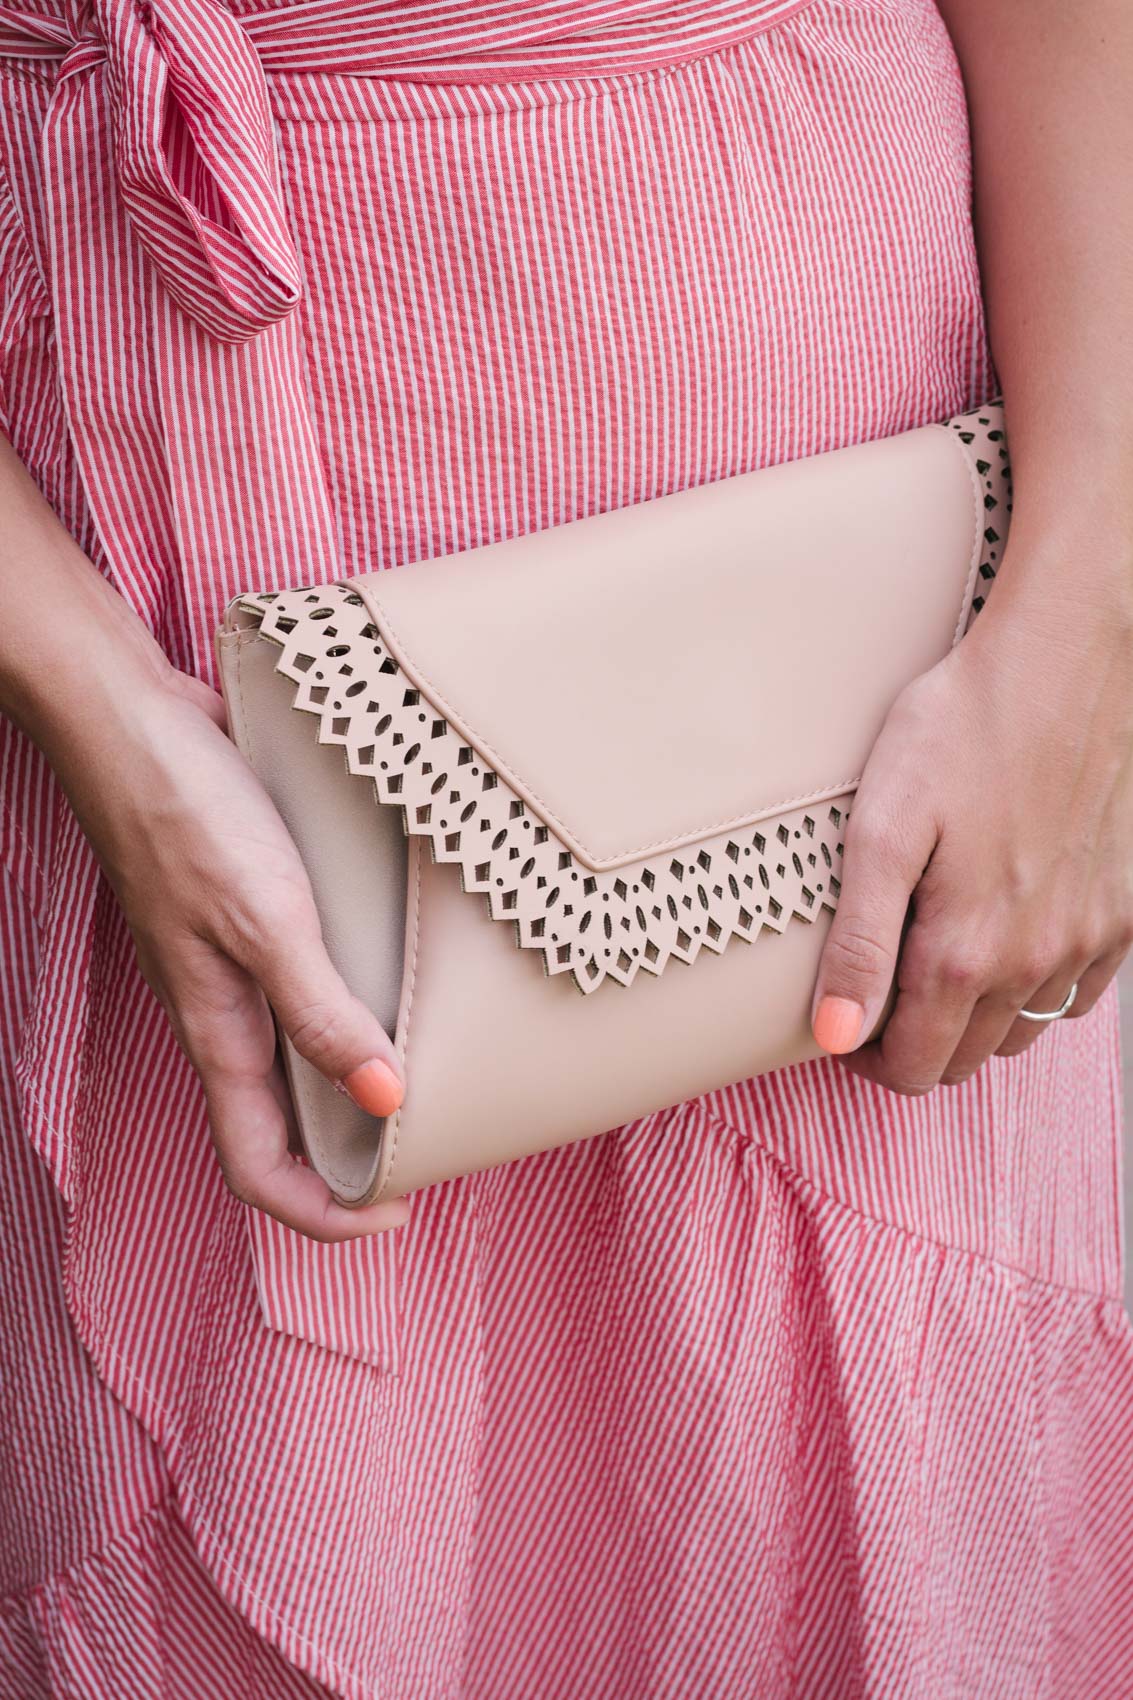 I recently grabbed this envelope clutch at Target, and I can't stop pairing it with my outfits. The nude color has a slight blush tint to it that makes it feminine and perfect to wear with anything. It also comes in a really pretty jade color.